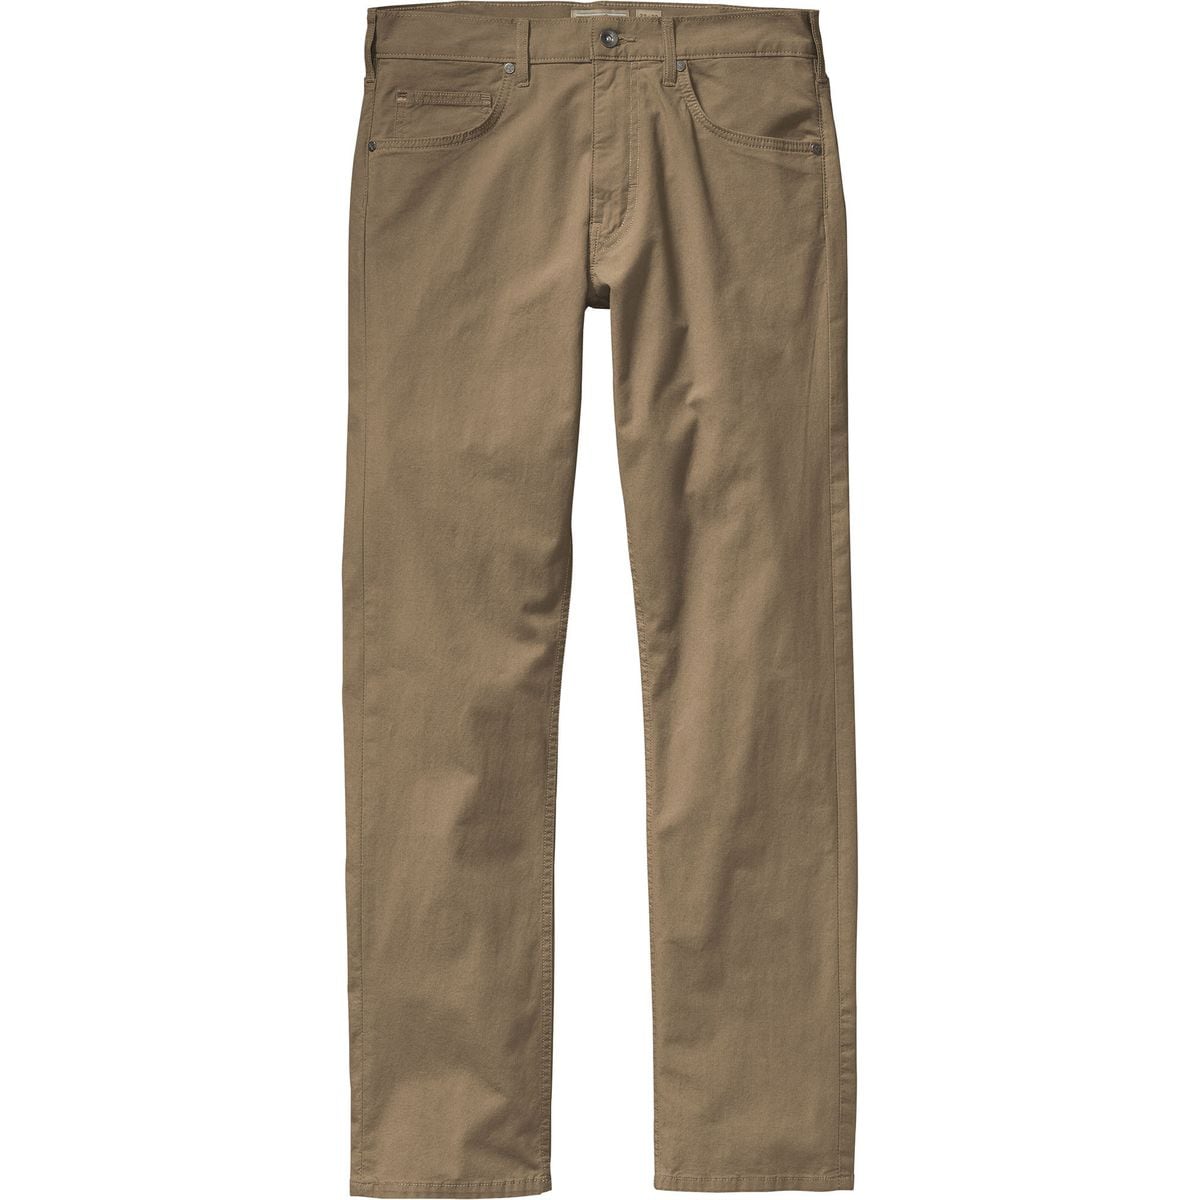 Patagonia Straight Fit All-Wear Jean Pant - Men's - Clothing